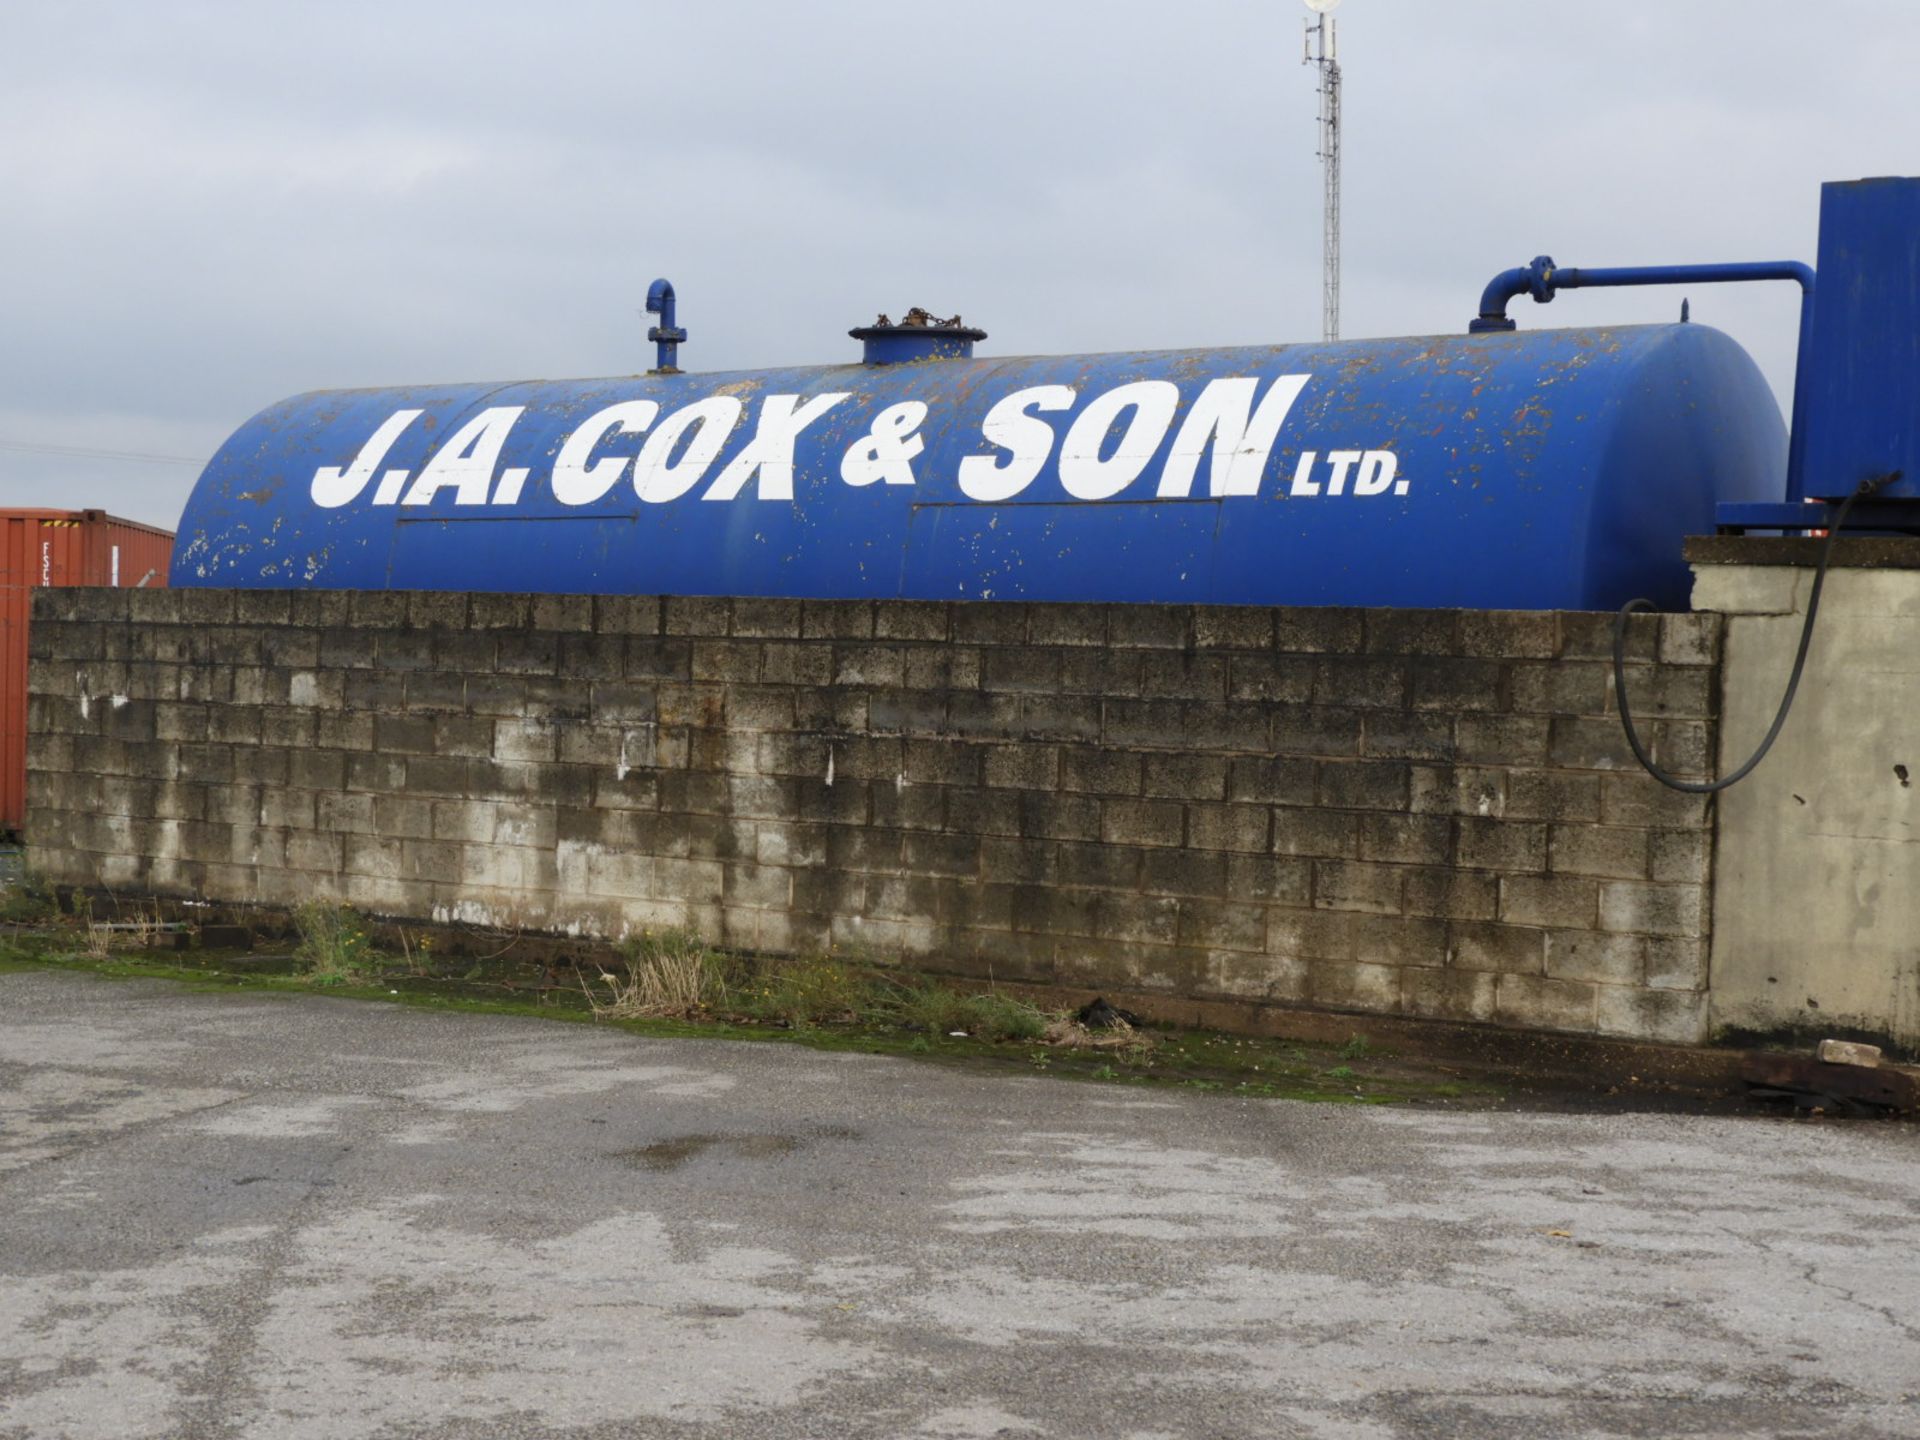 *Large Unbunded Road Diesel Storage Tank with Delivery Meter and Hose - Please view all images